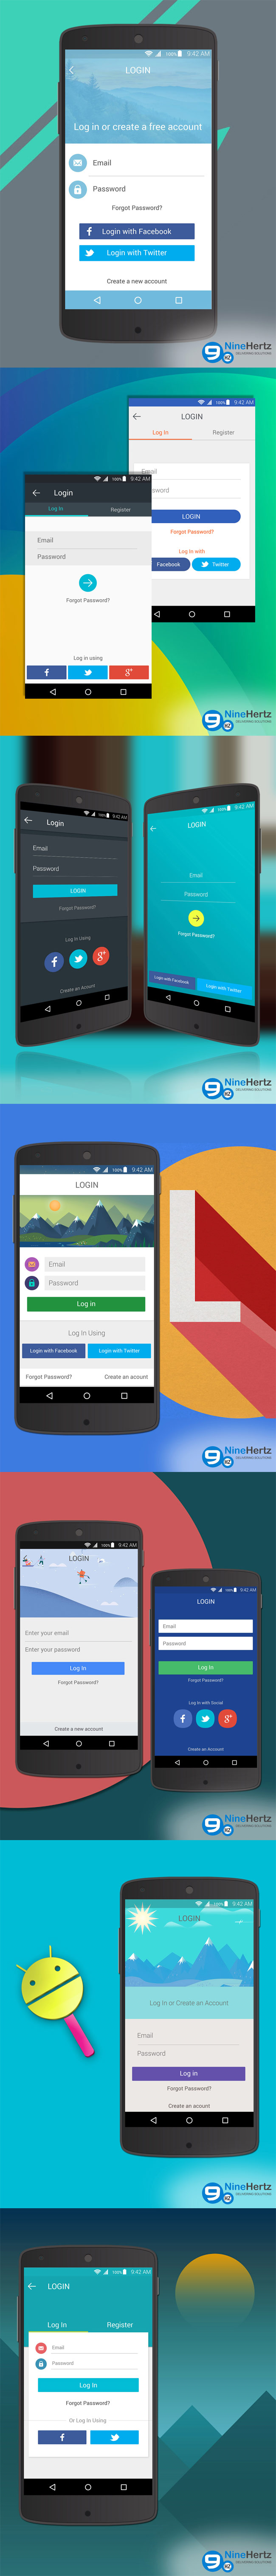 10 Free PSD Login Screens for Android Lollipop